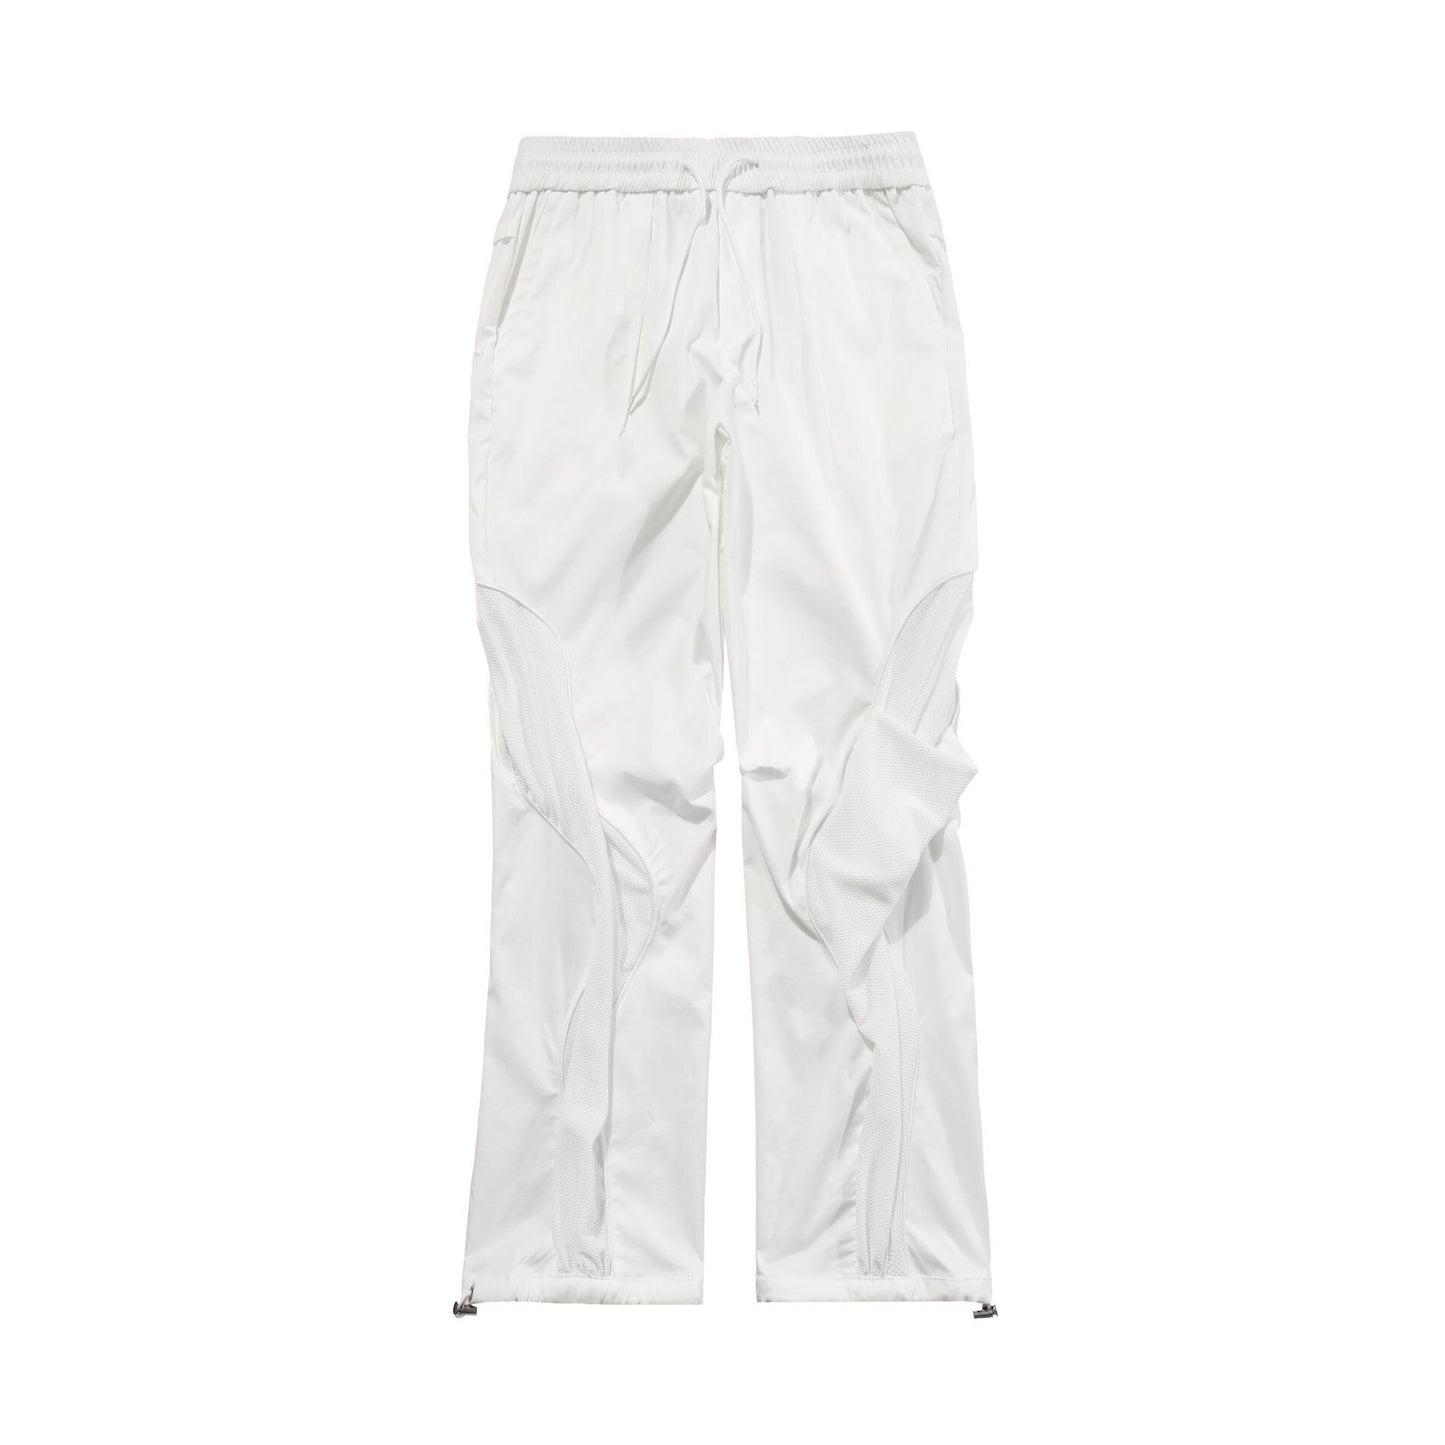 Made Extreme tactical pleated unisex cargo pants